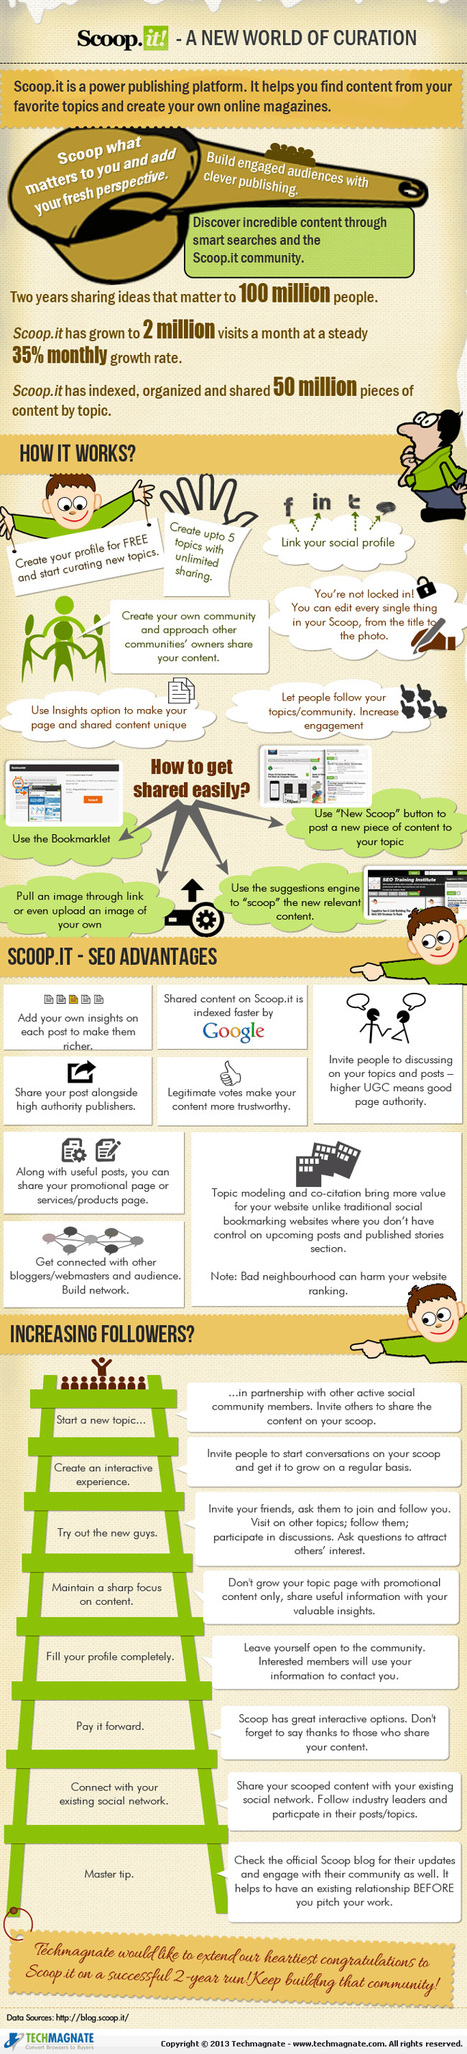 Scoop.It for SEO – A New World of Curation [Infographic] | Didactics and Technology in Education | Scoop.it